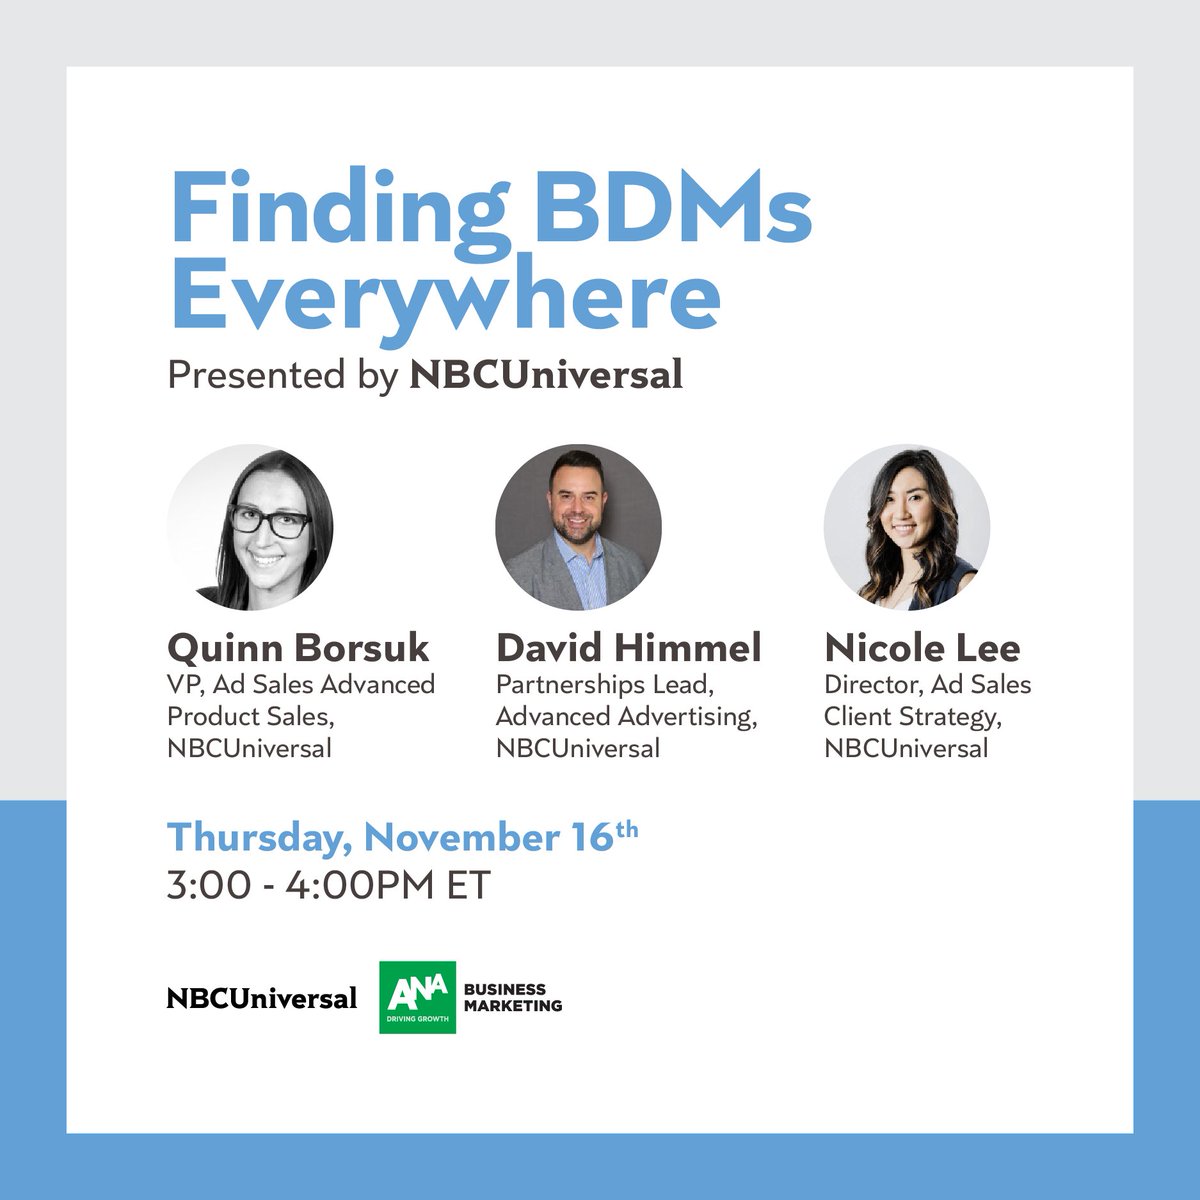 Register for our webinar in partnership with @ANAmarketers: Finding BDMs Everywhere. Hear from @NBCUniversal Audience Targeting experts Quinn Borsuk, David Himmel, and Nicole Lee on how B2B marketers can employ a data-driven approach to reach today's dynamic business audiences.…